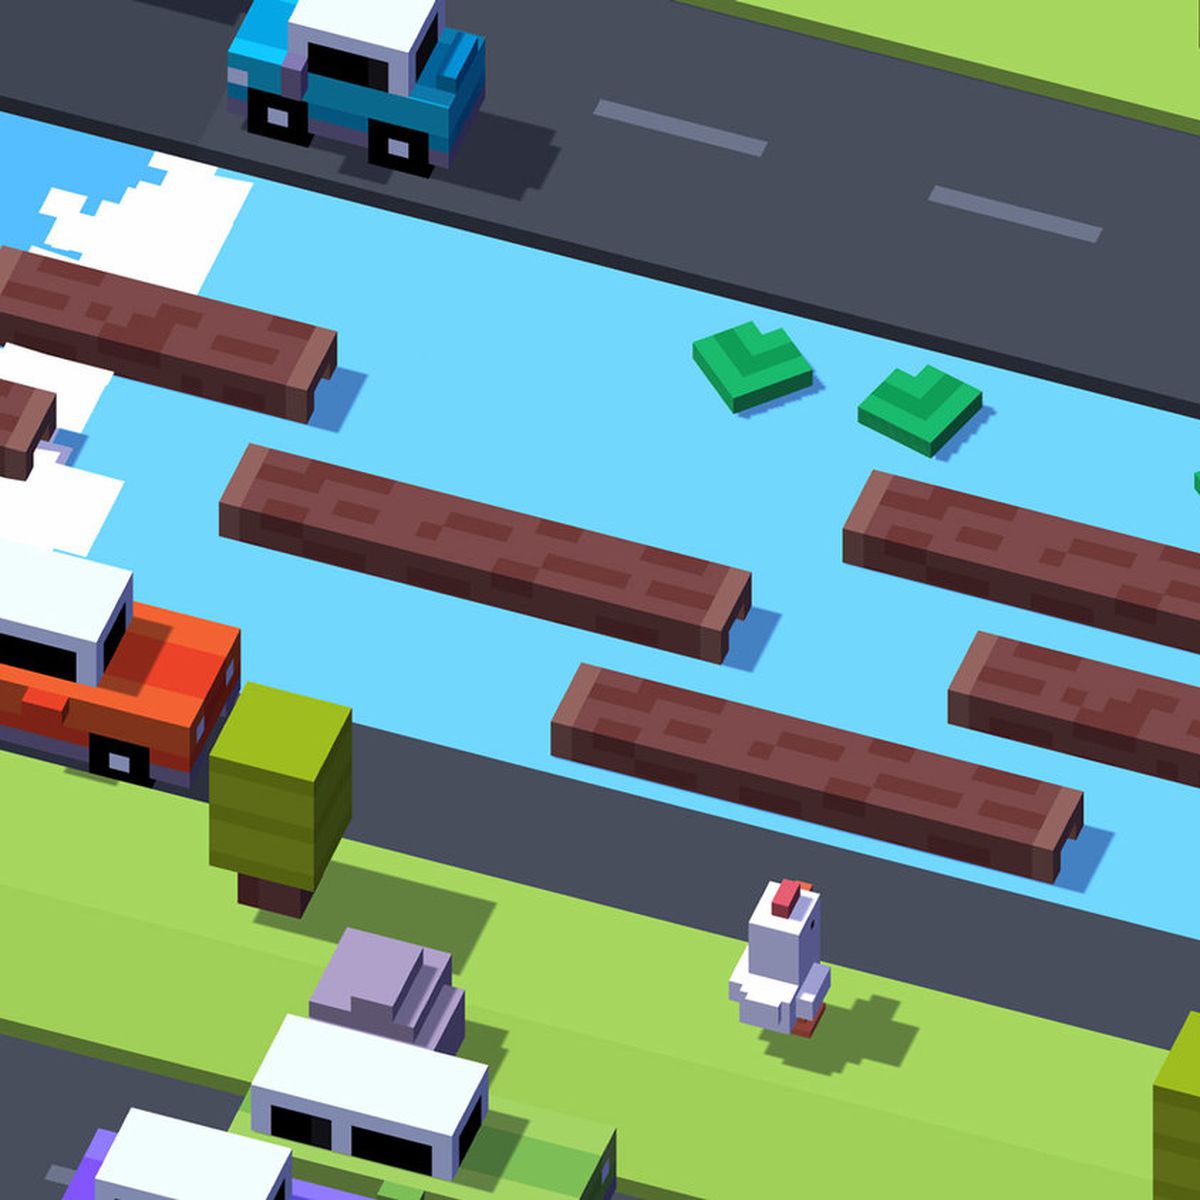 Hit iOS game Crossy Road will soon leap onto Apple Arcade